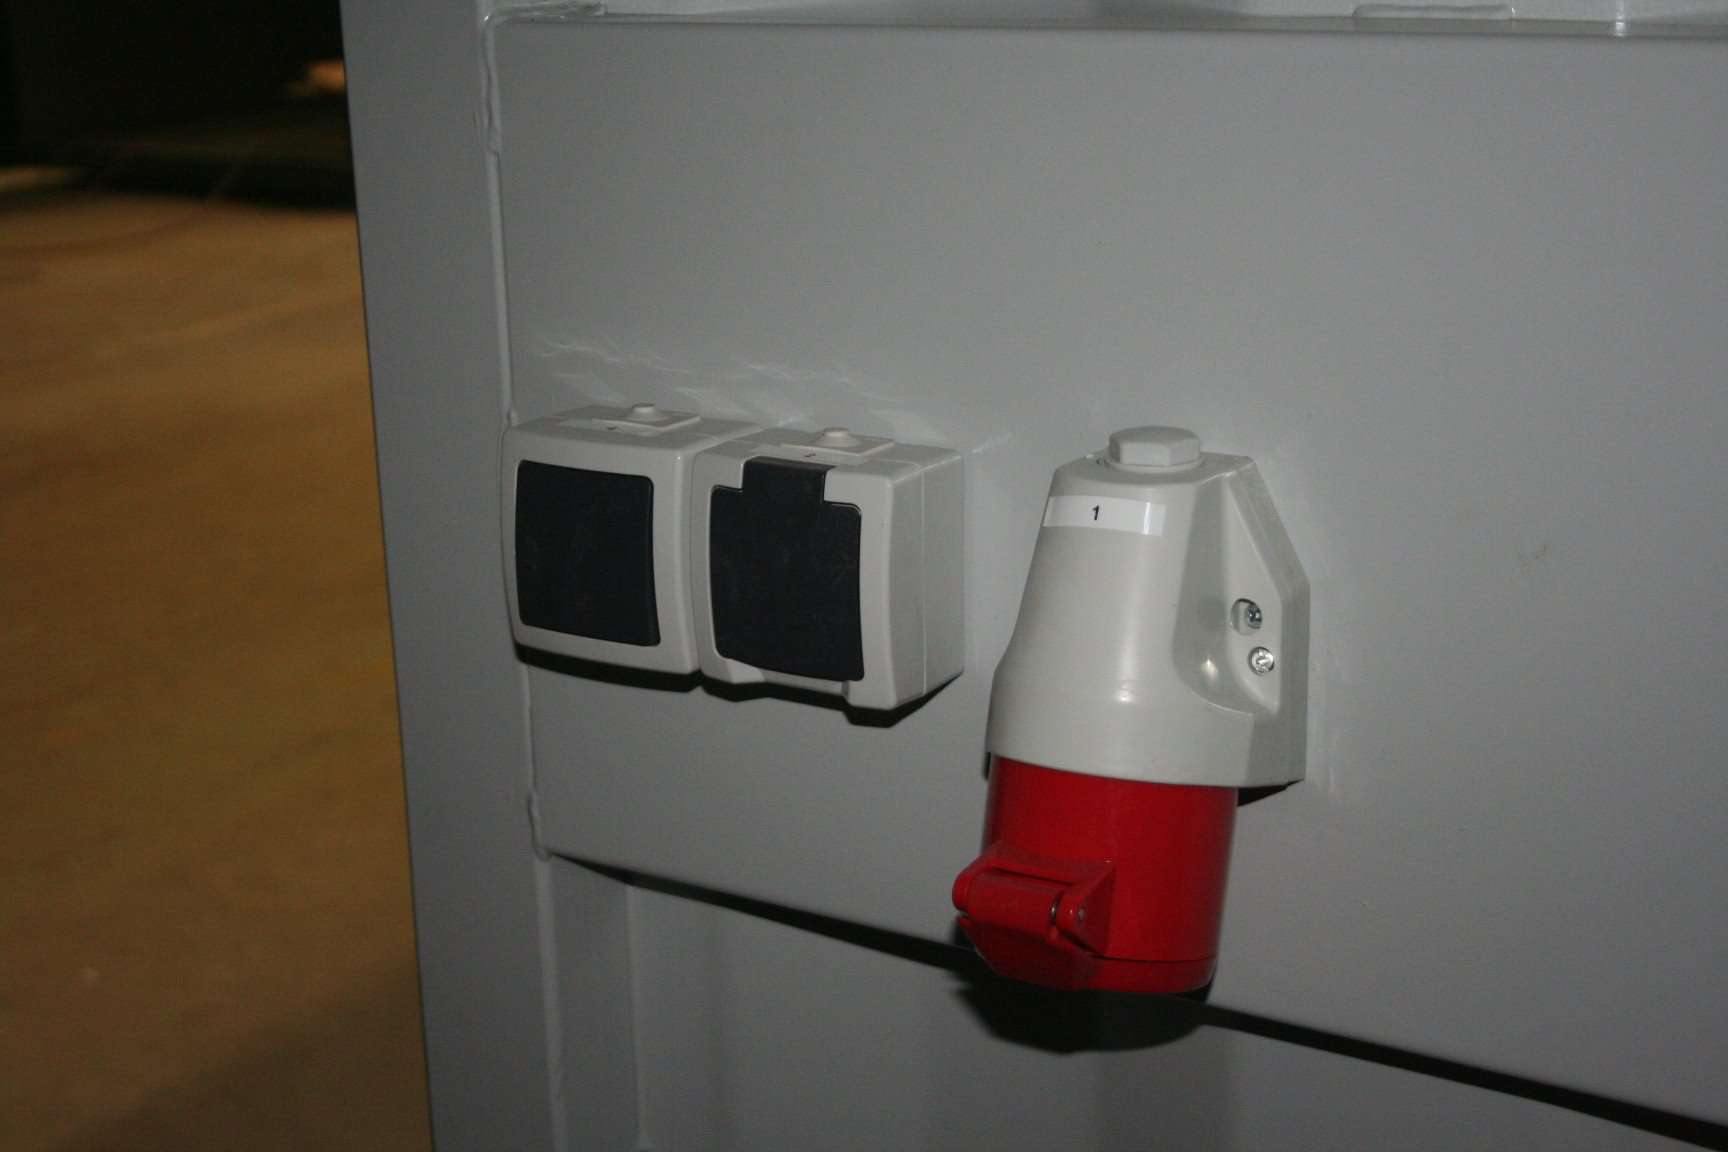 ABS intec - Technikcontainer Industriecontainer Steckdose 230V 400V Lichtschalter - BHKW-Container